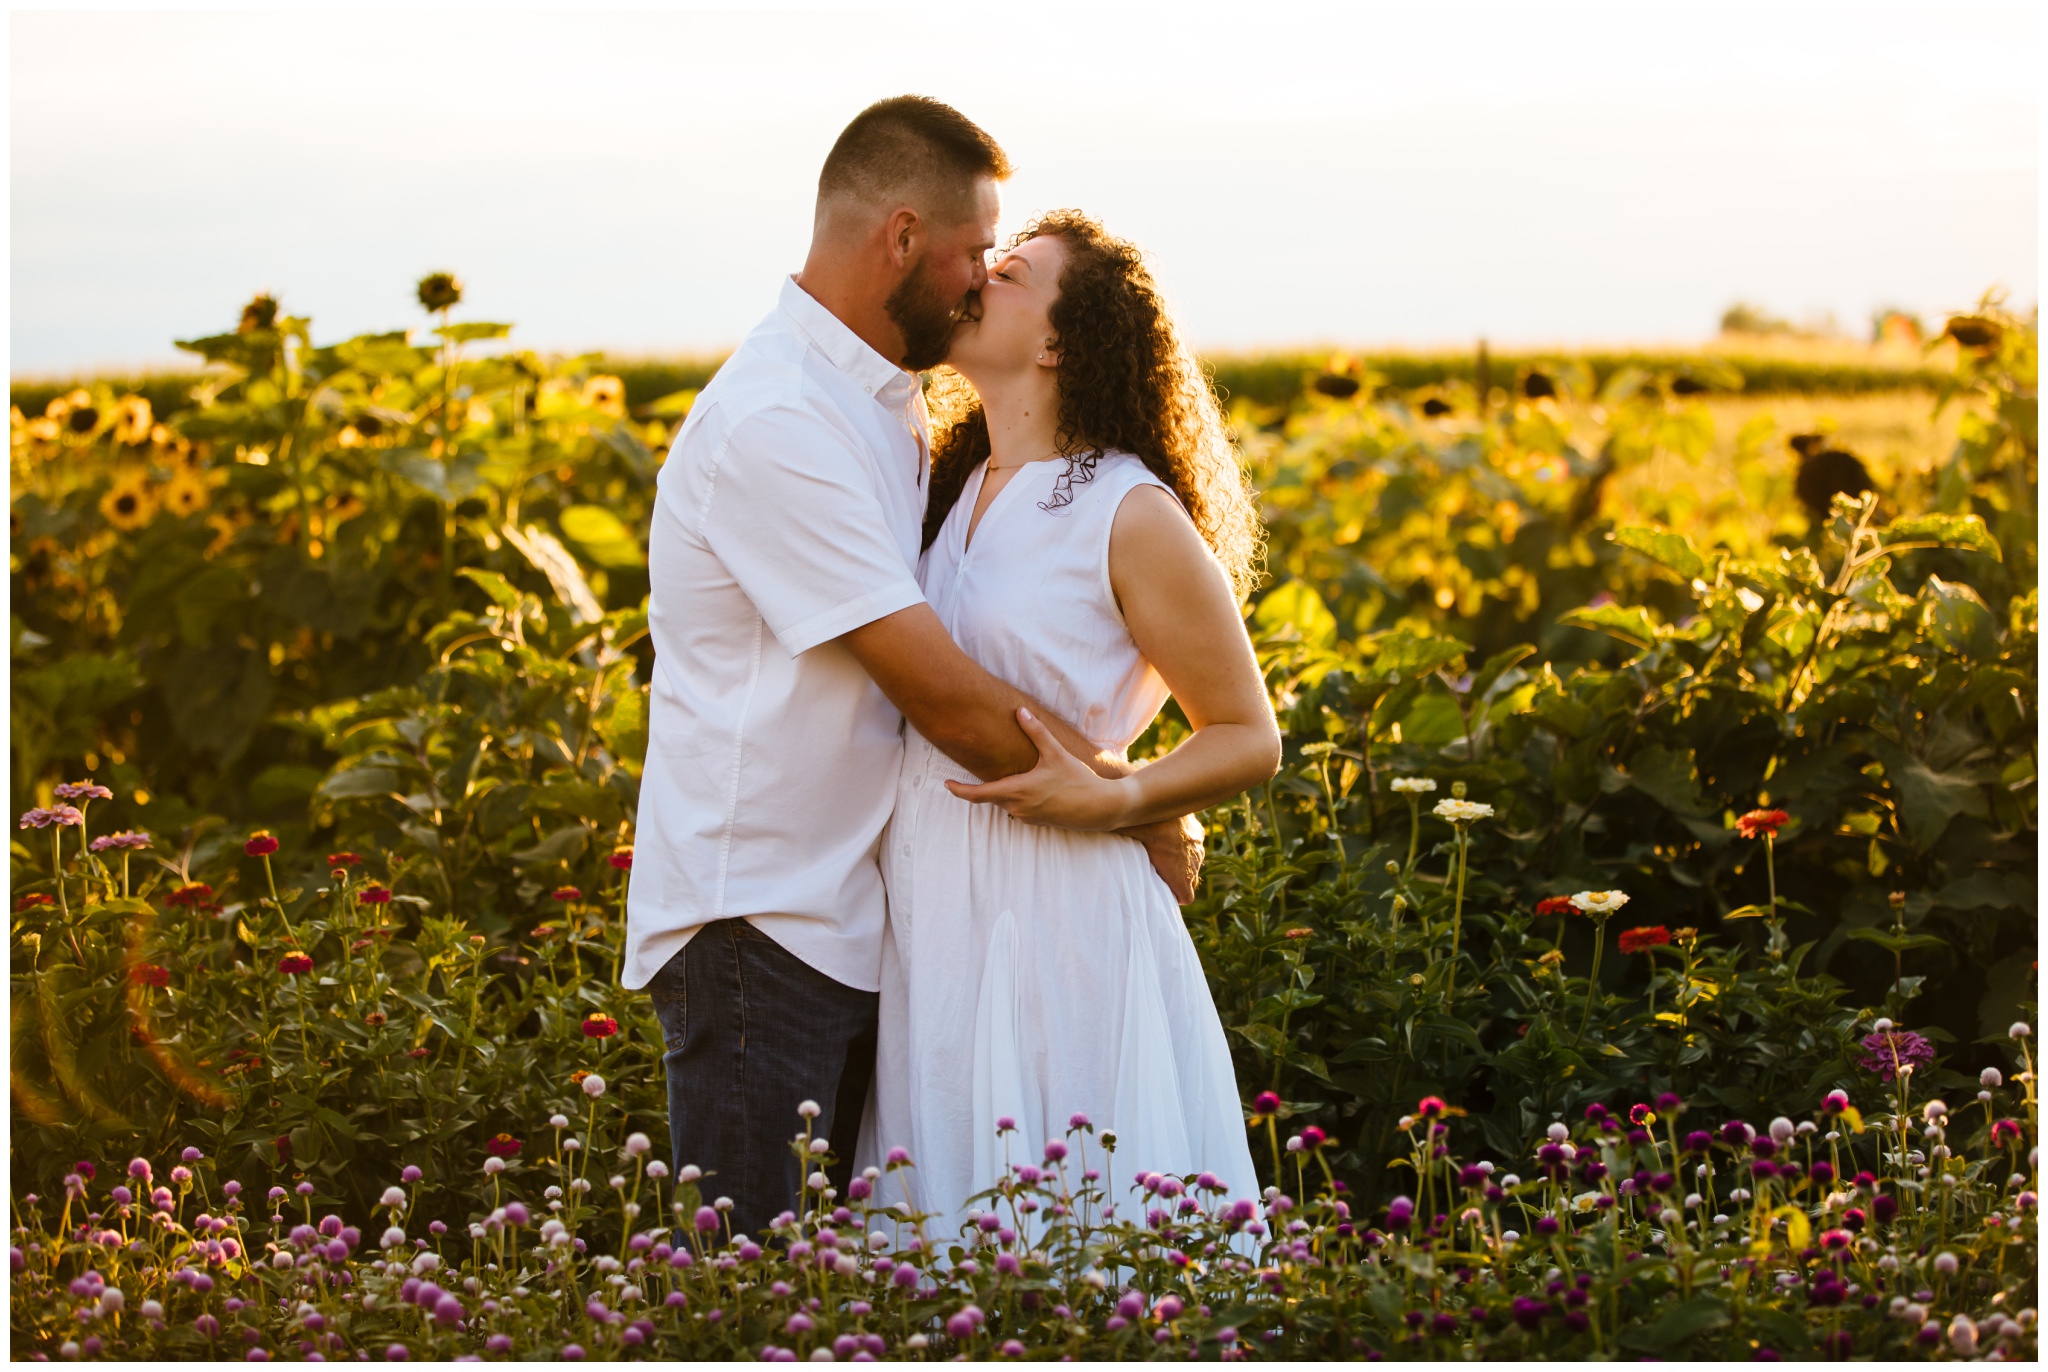 A couple kisses in a field of wildflowers during their summer engagement session on a farm.